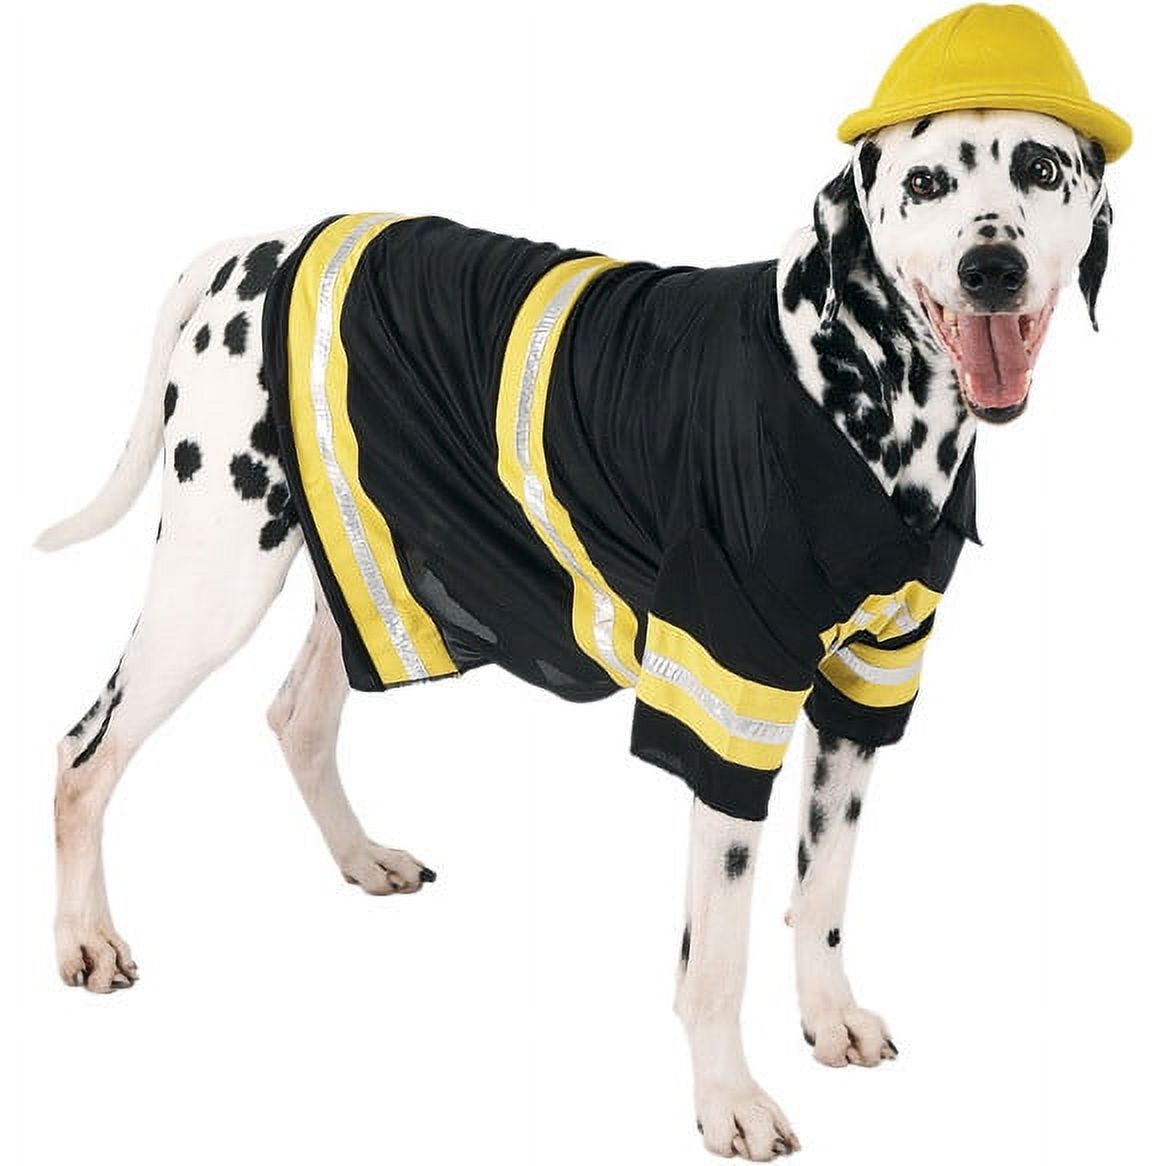 Firefighter Dog Costume~Small / Black - image 1 of 1